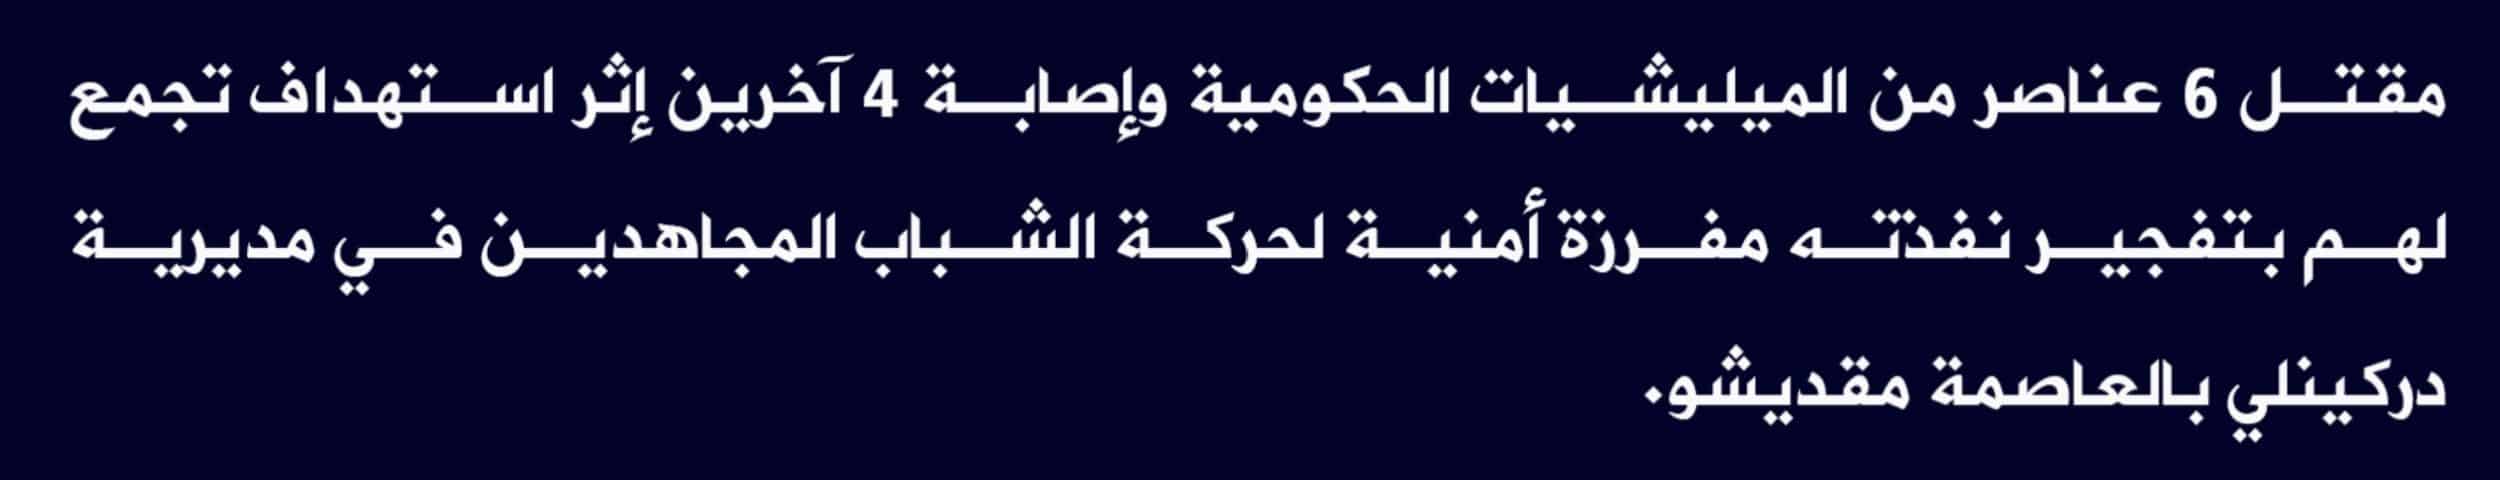 (Claim) al-Shabaab: Six Somalian Forces Were Killed and Four Others Injured in an IED Attack on their Gathering in Darkinli, Mogadishu, Somalia - 9 July 2022